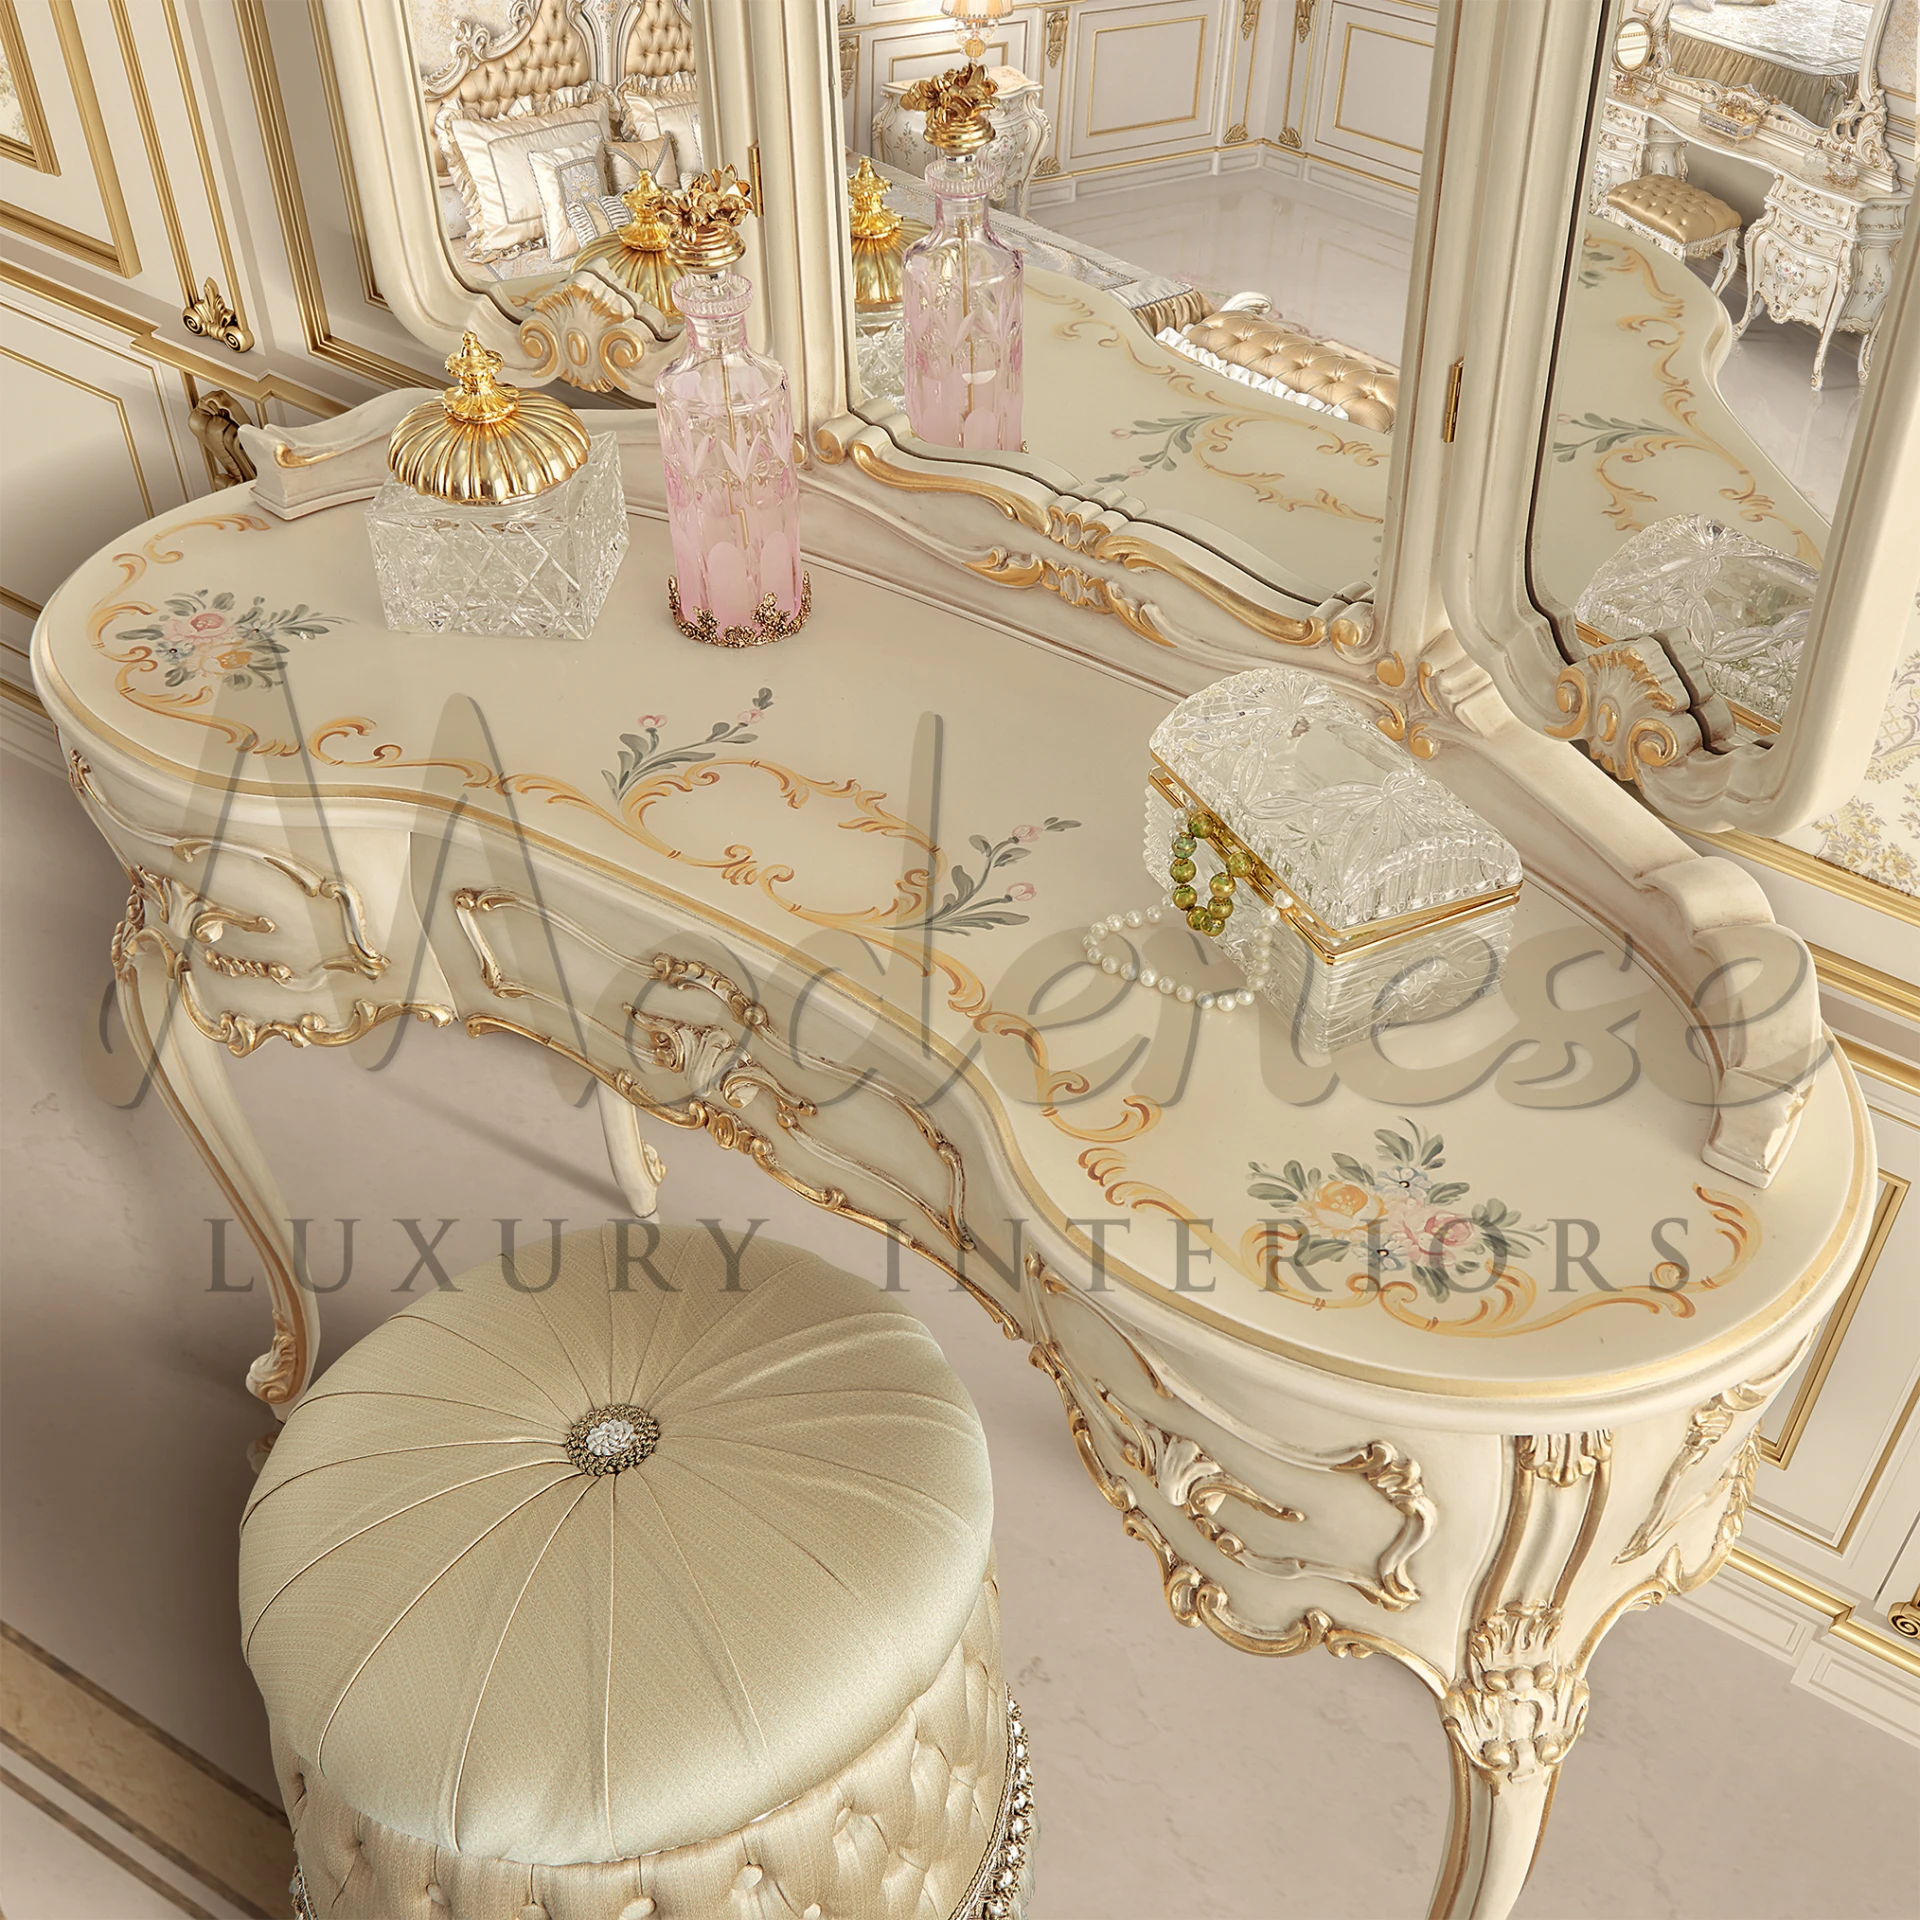 Indulge in classic sophistication with our Victorian-inspired dressing table, boasting a unique bean shape and exquisite craftsmanship for timeless allure.